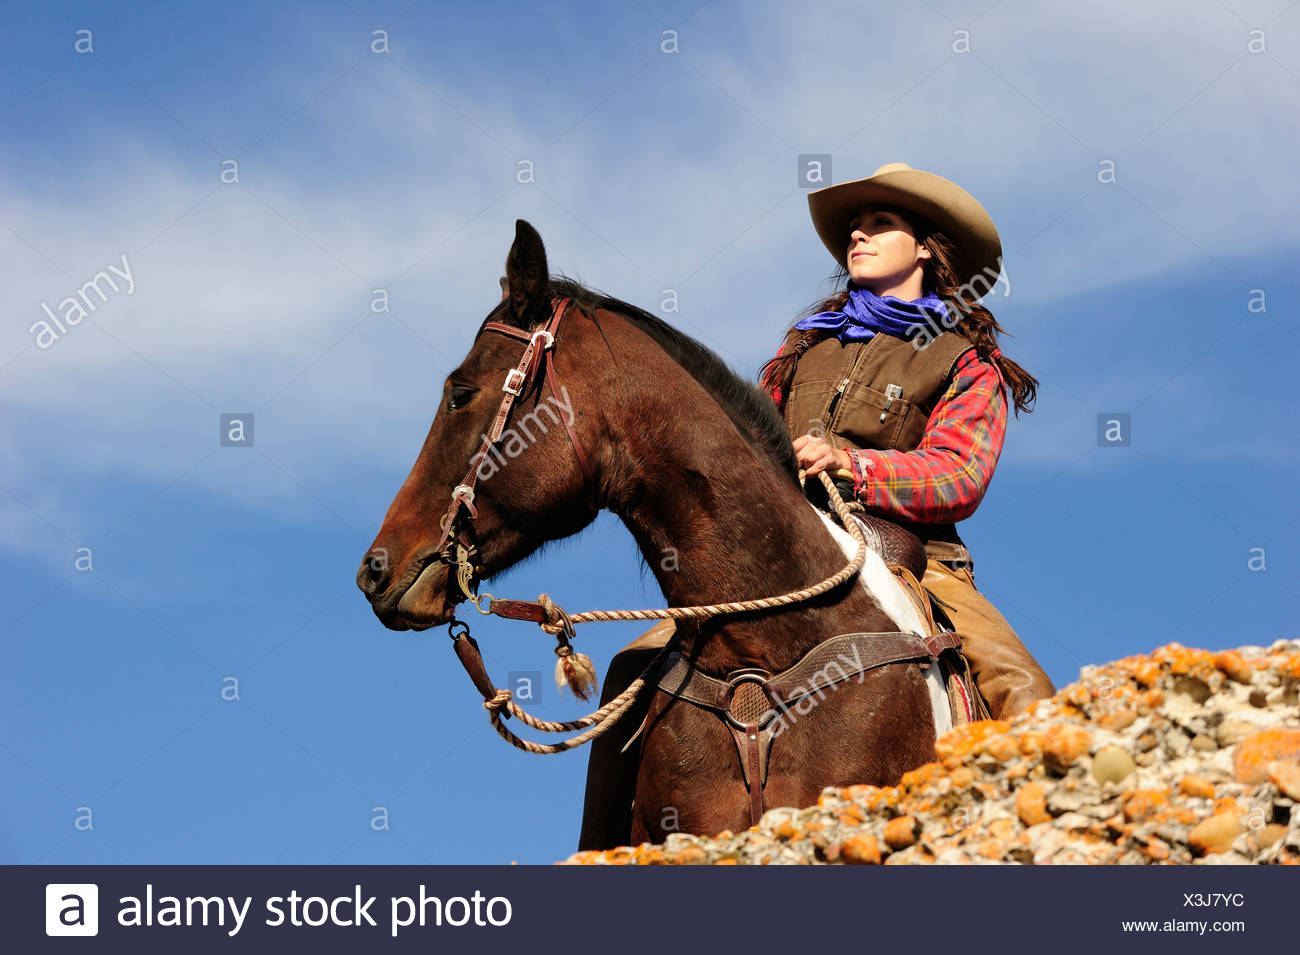 Cowgirl on a horse looking into the 